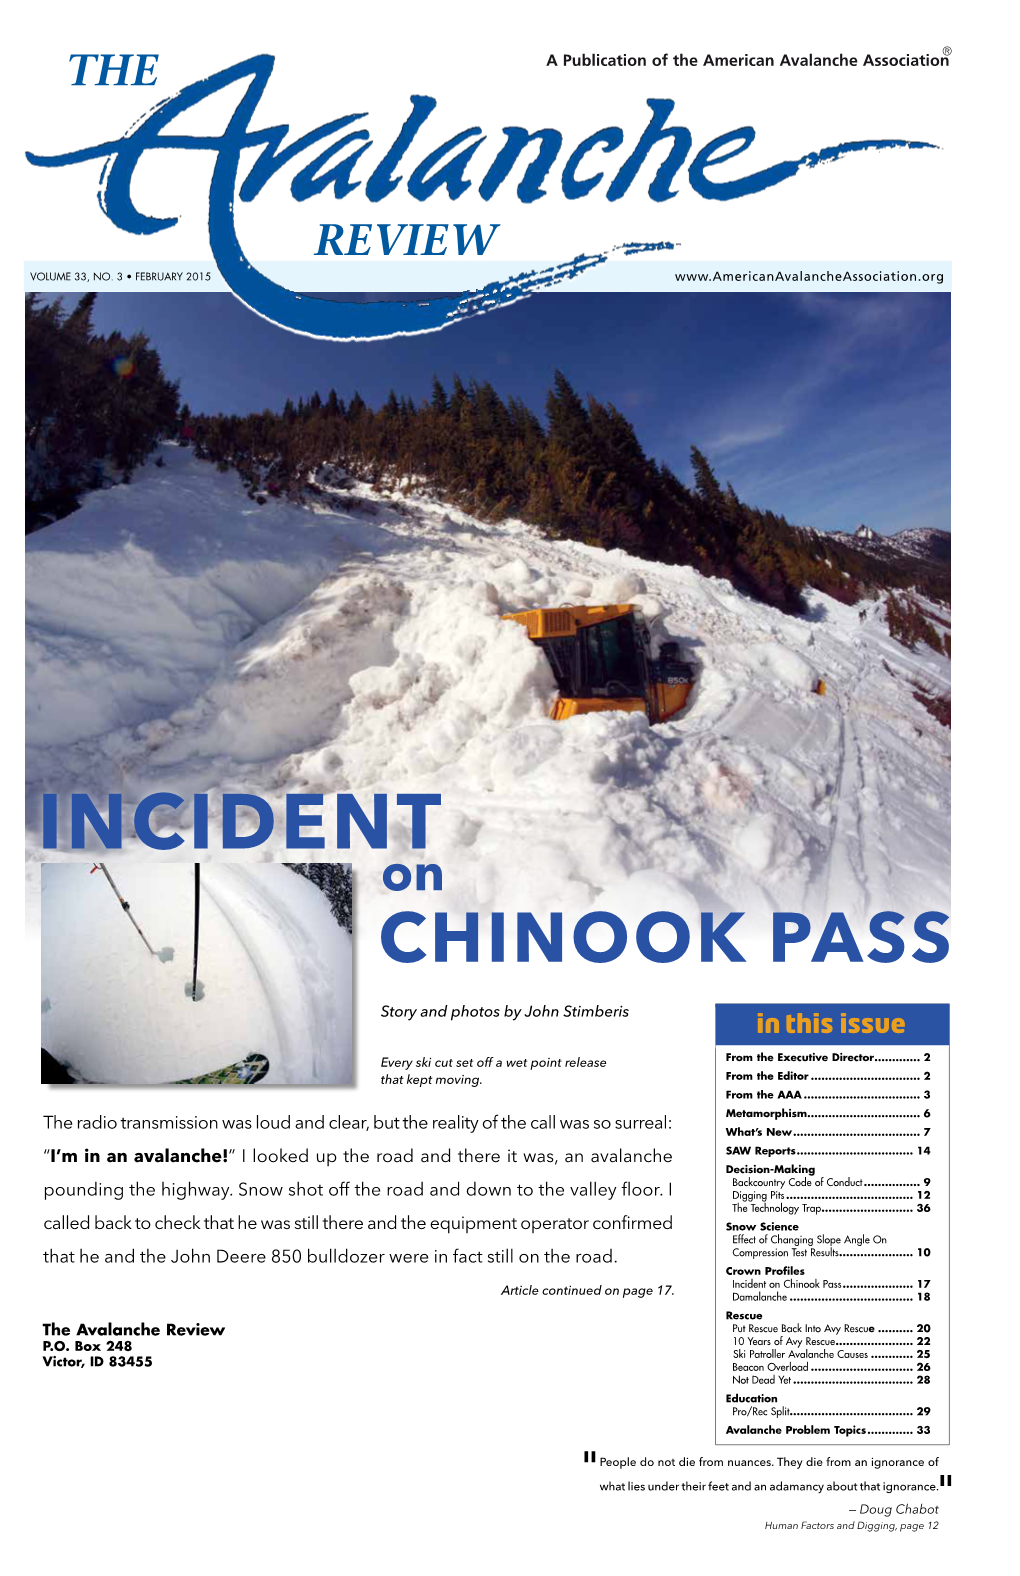 INCIDENT on CHINOOK PASS Story and Photos by John Stimberis in This Issue